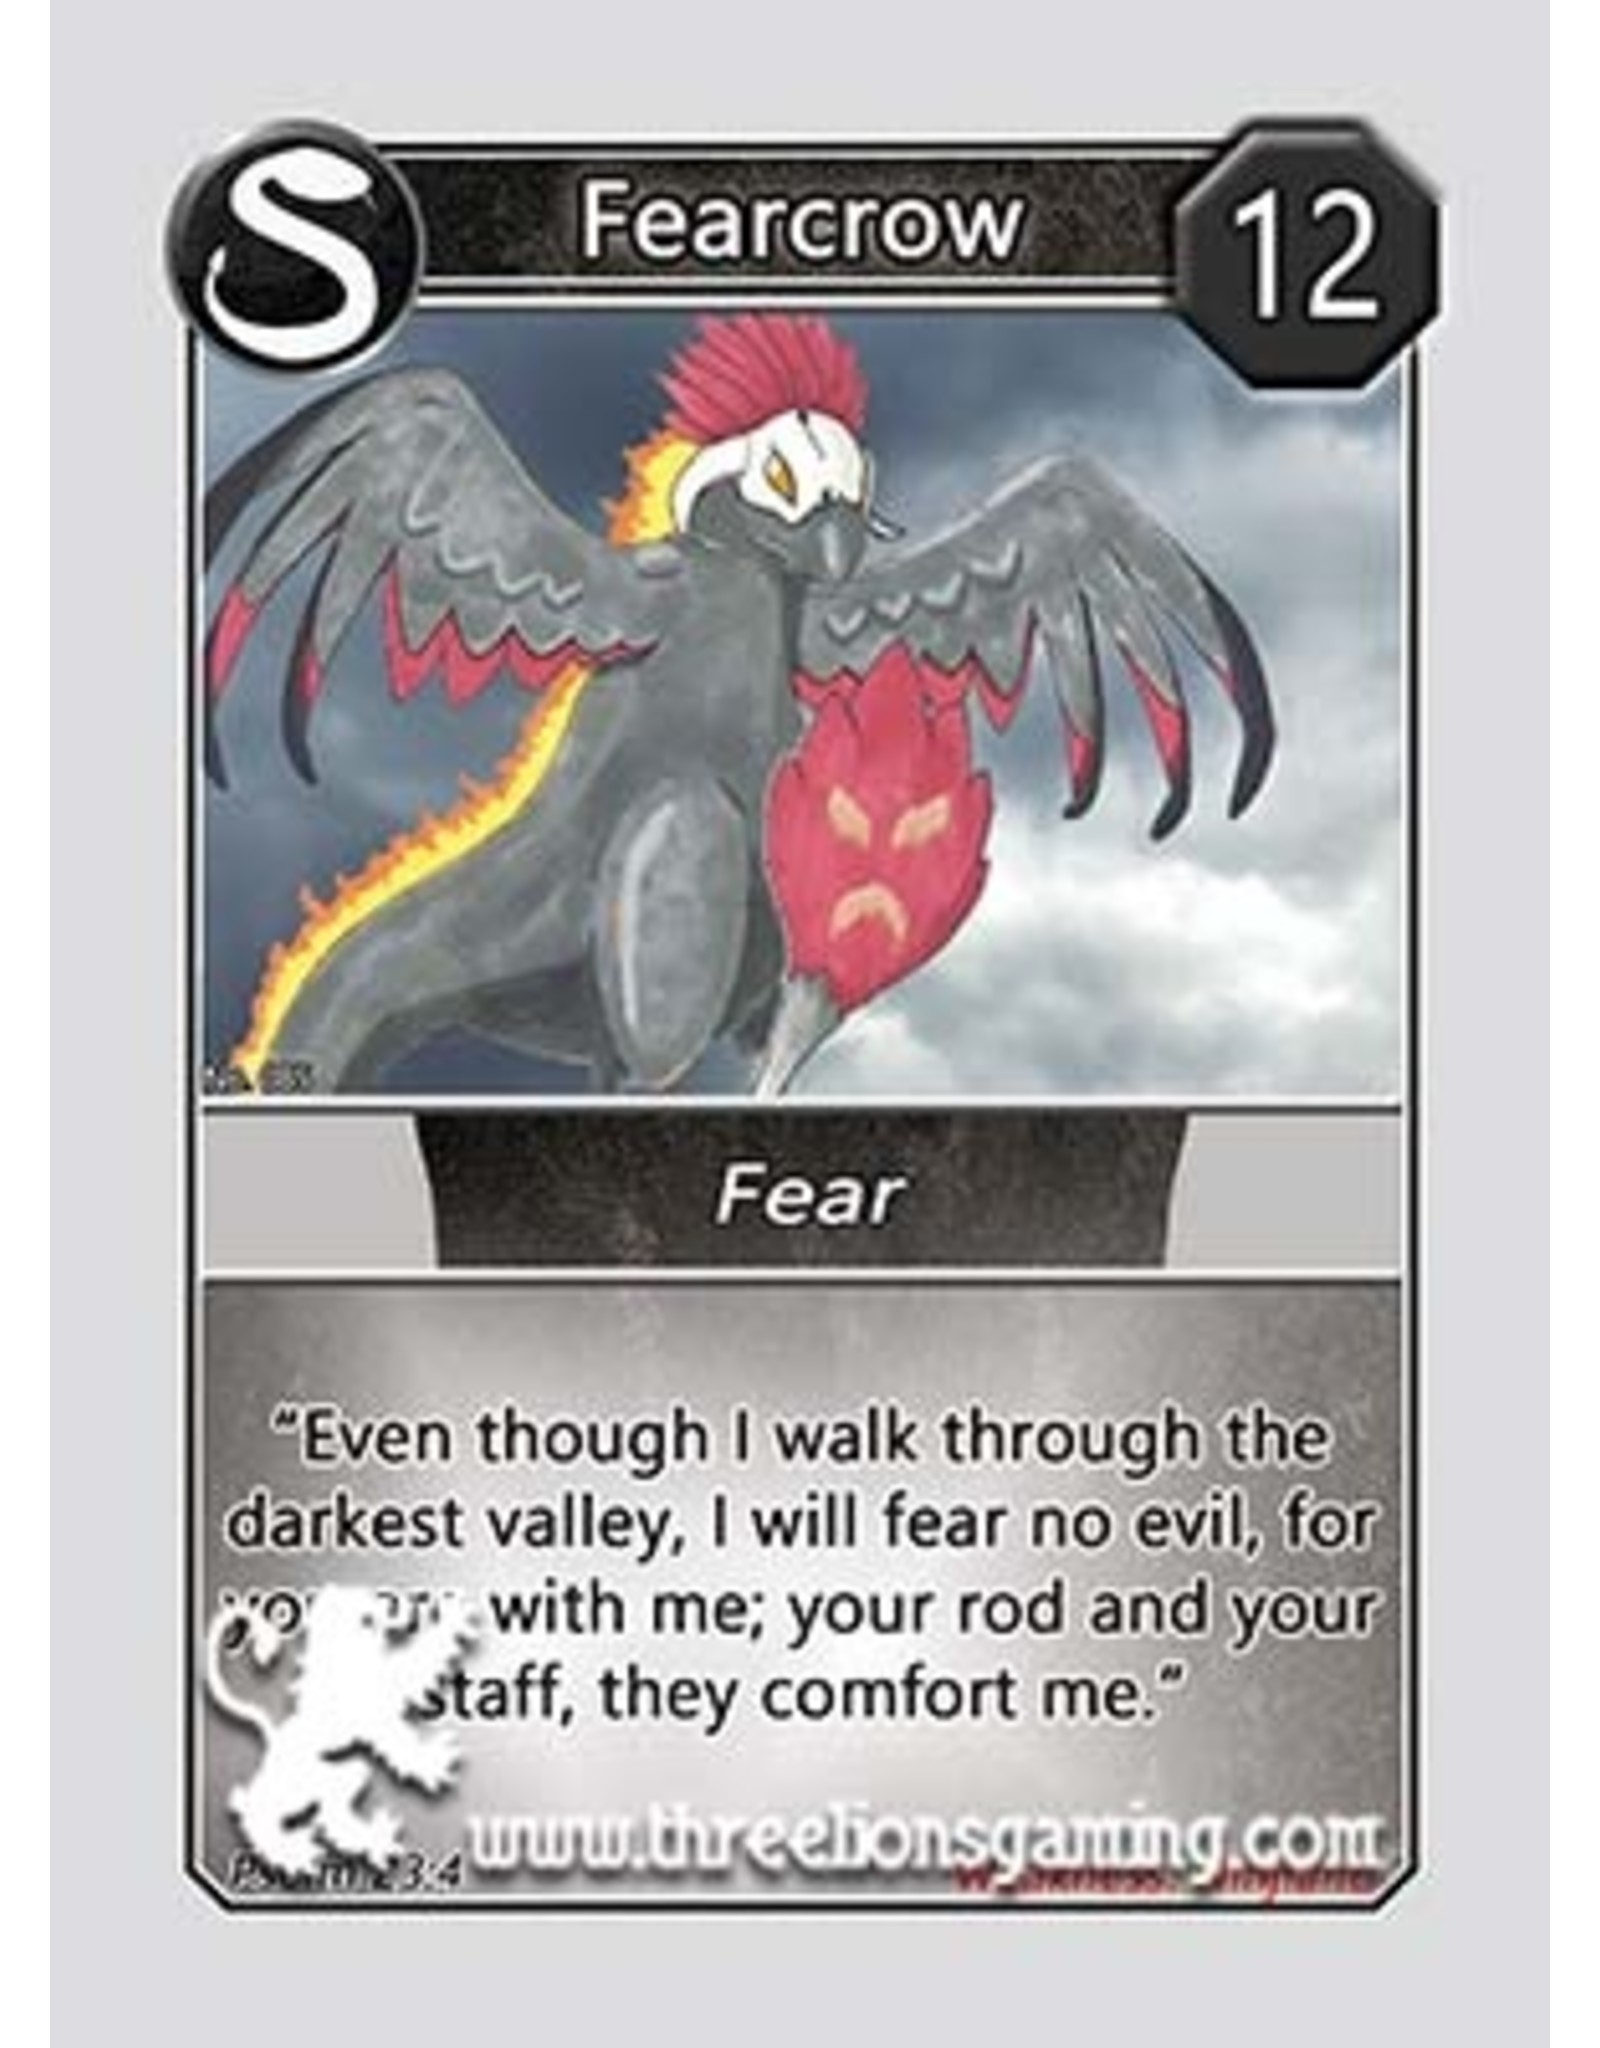 S1: Fearcrow